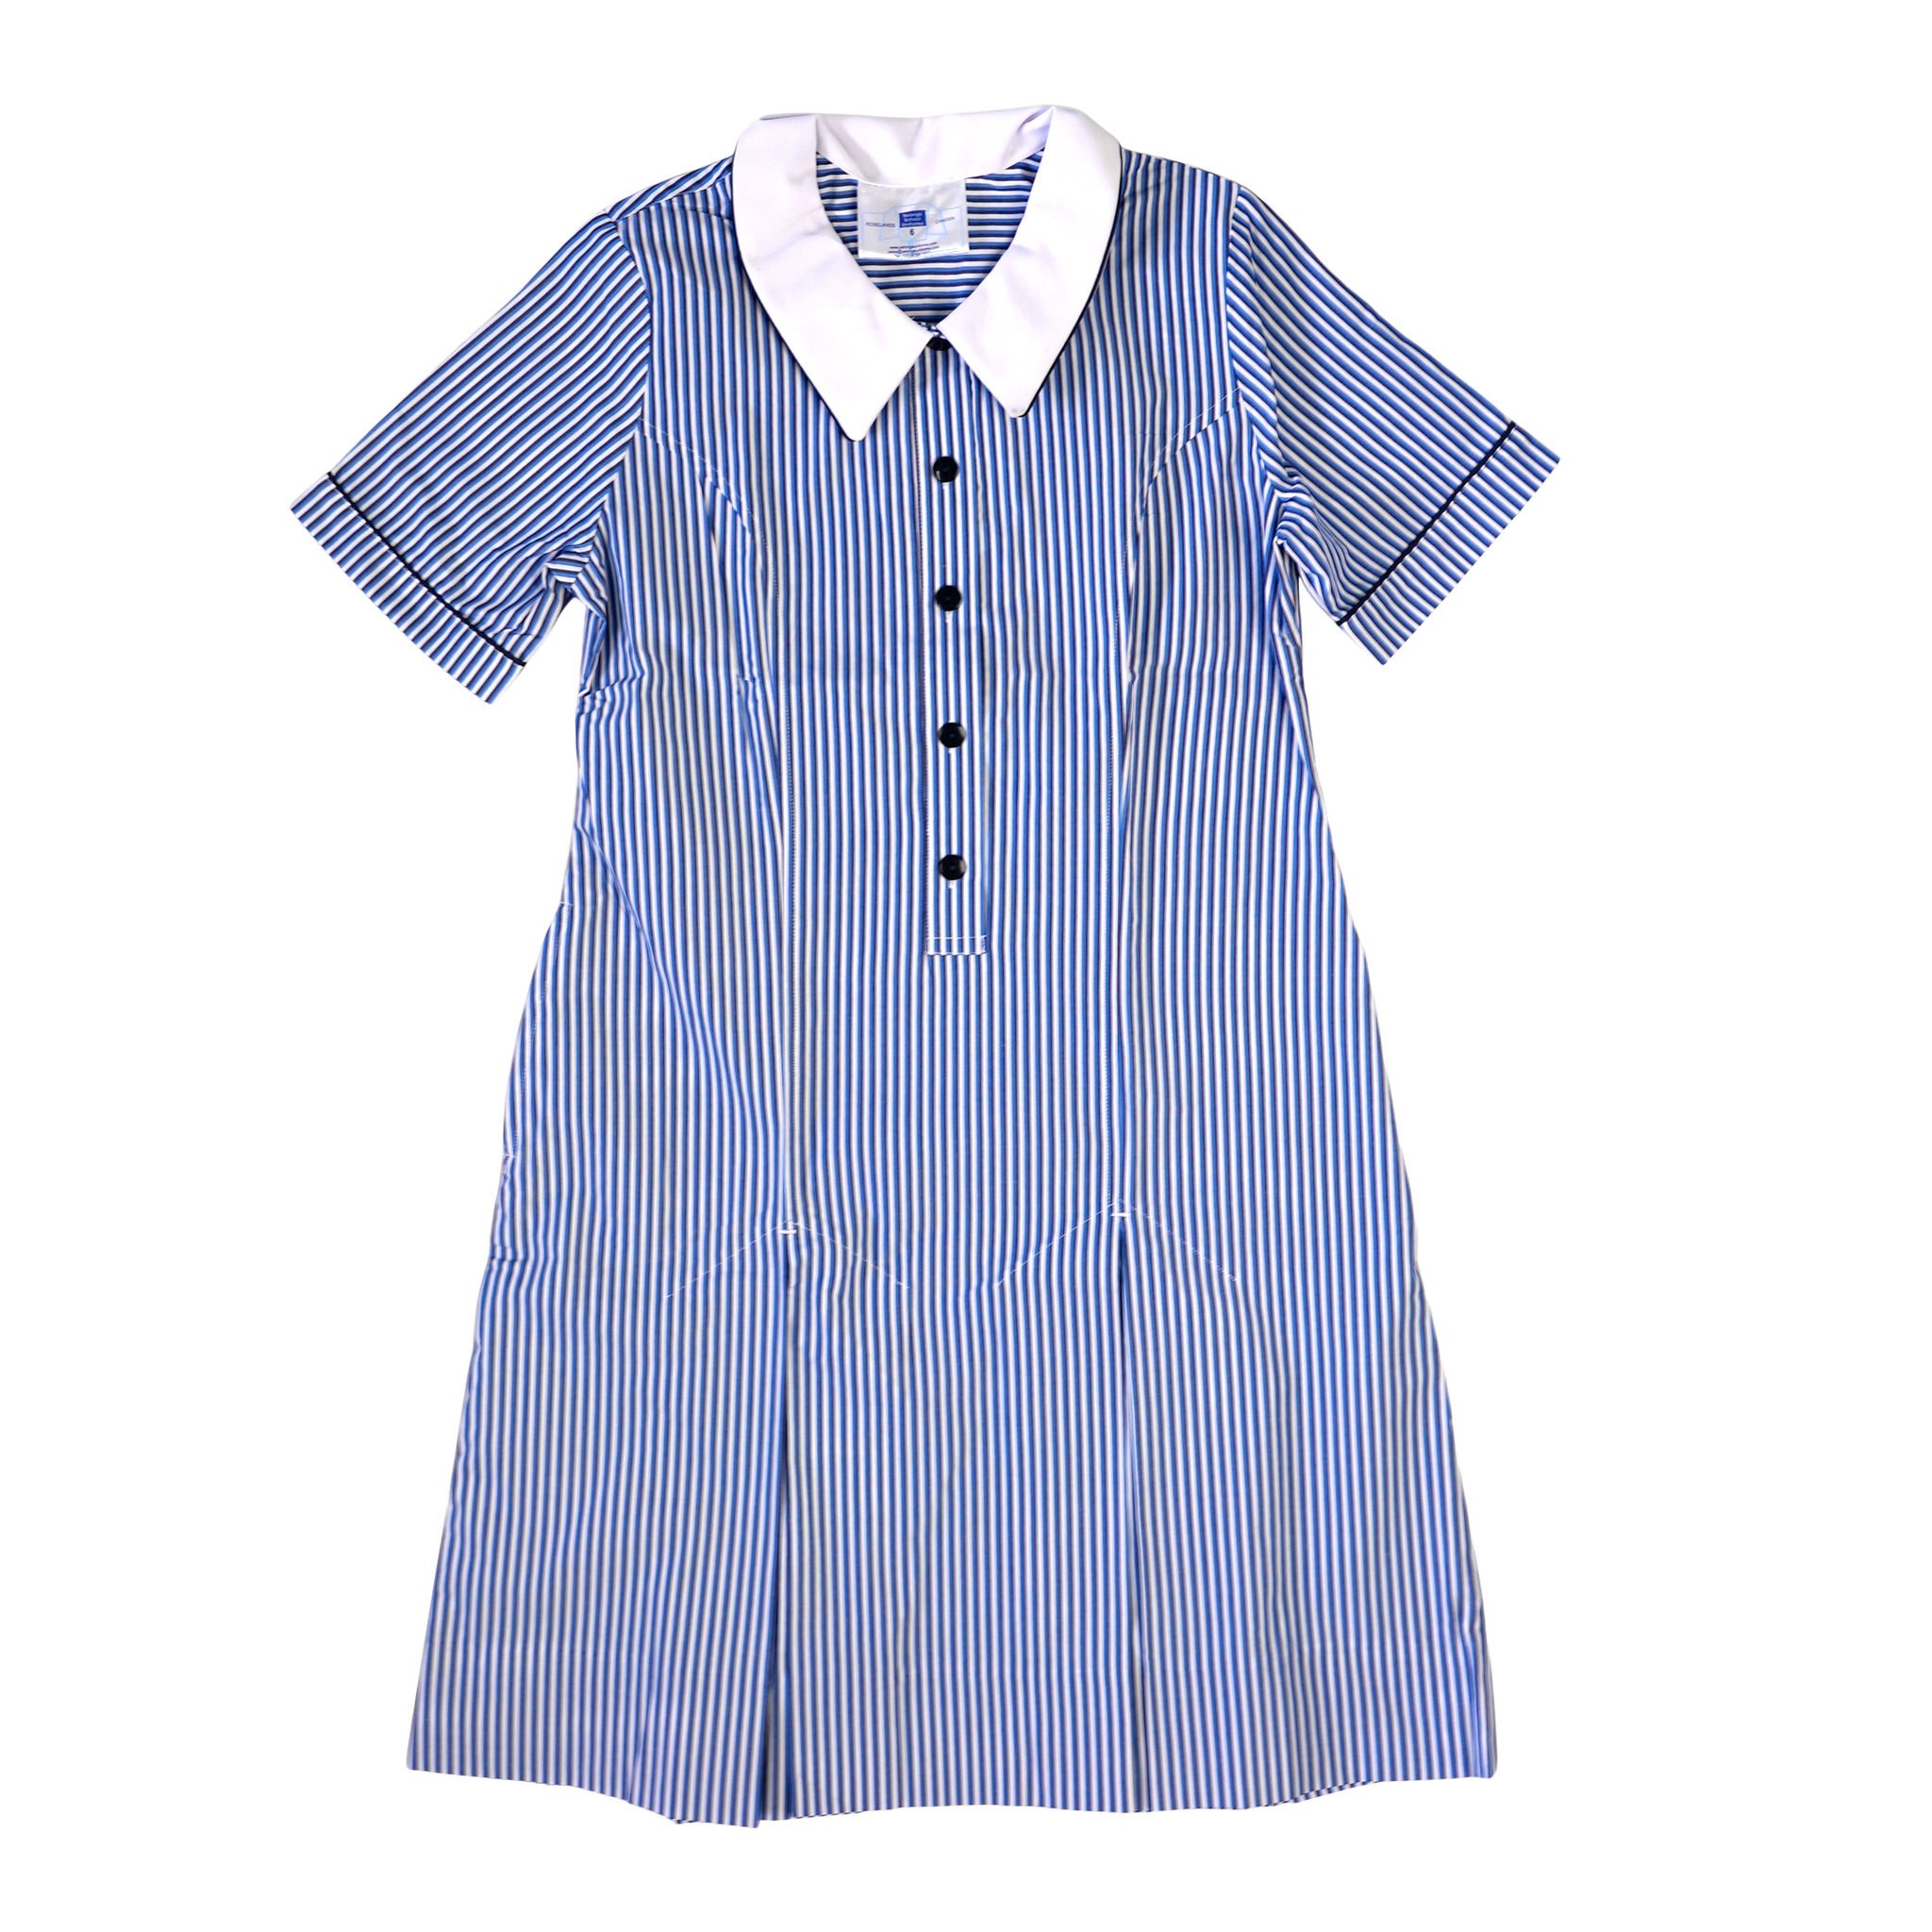 Year 7 to 9 Summer Dress